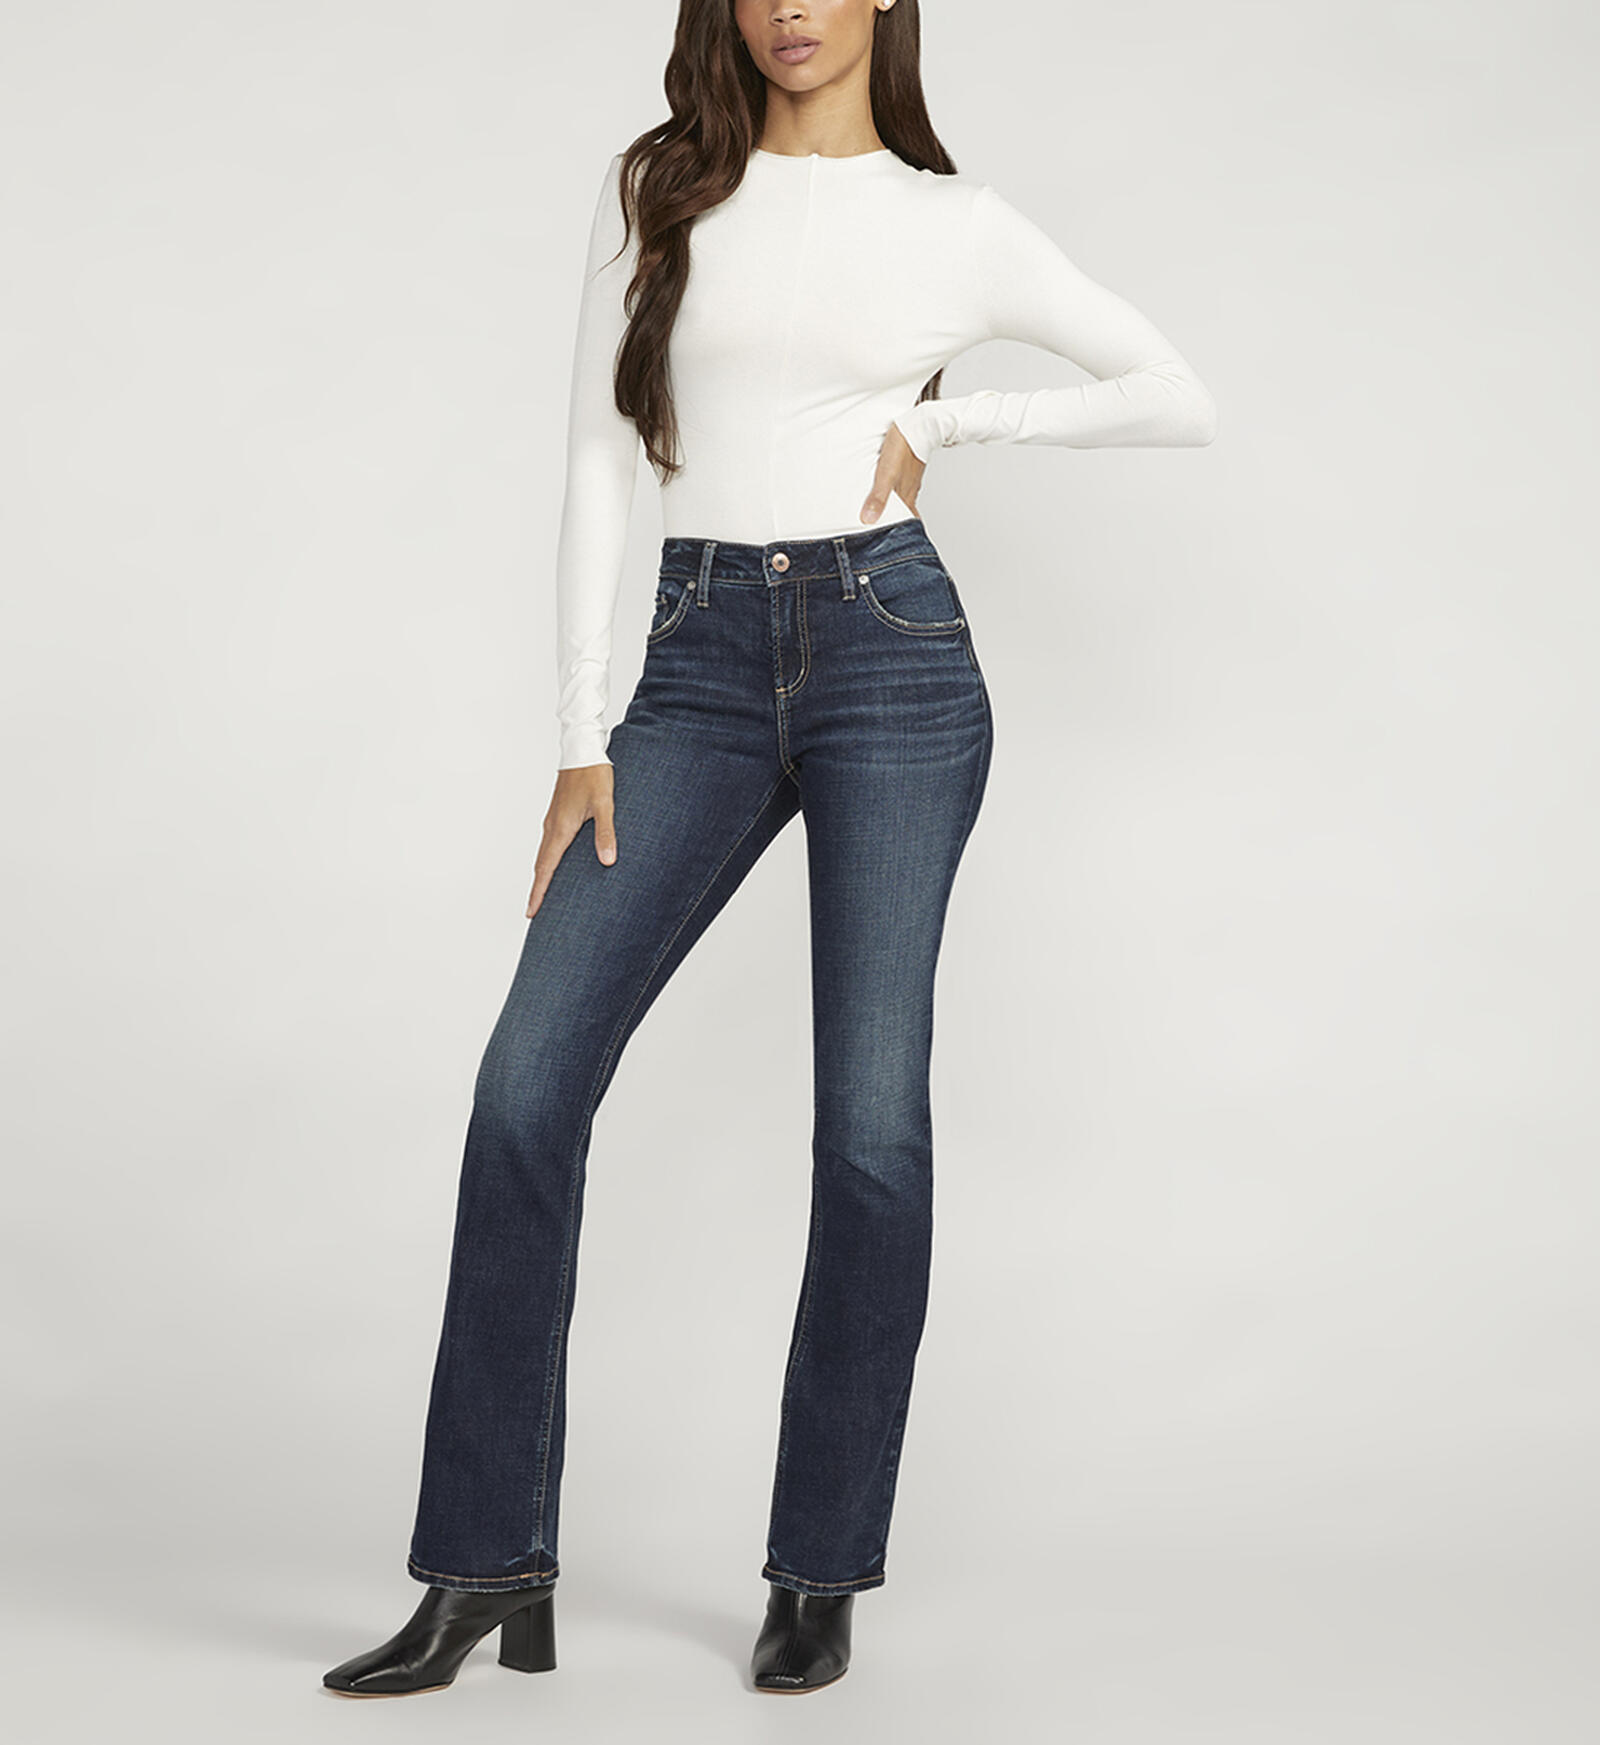 Buy Elyse Mid Rise Slim Bootcut Jeans for USD 84.00